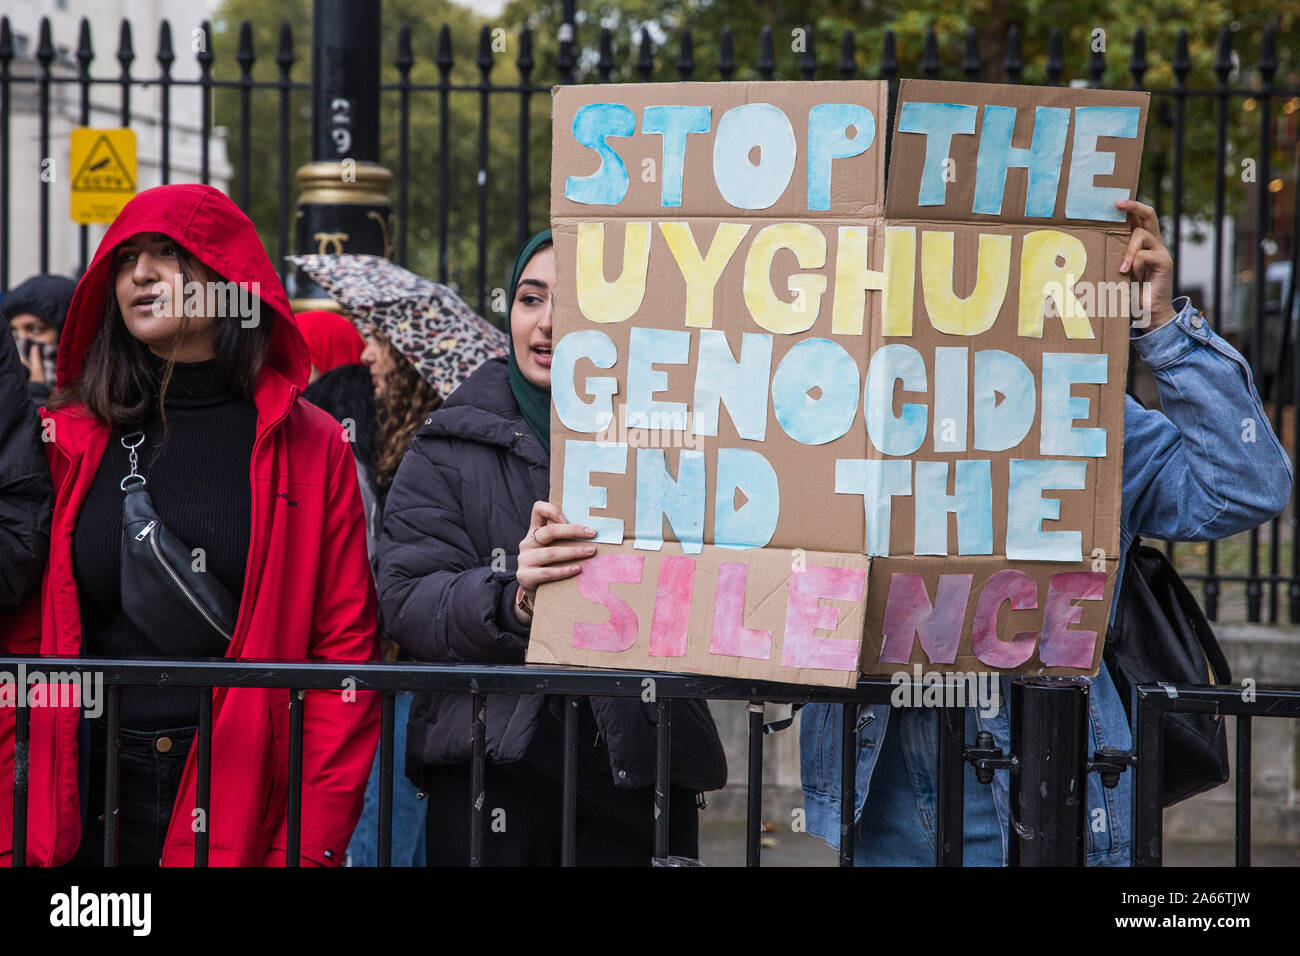 London, UK. 23 October, 2019. A small group of demonstrators stands opposite Downing Street holding signs criticising human rights abuses against the Stock Photo